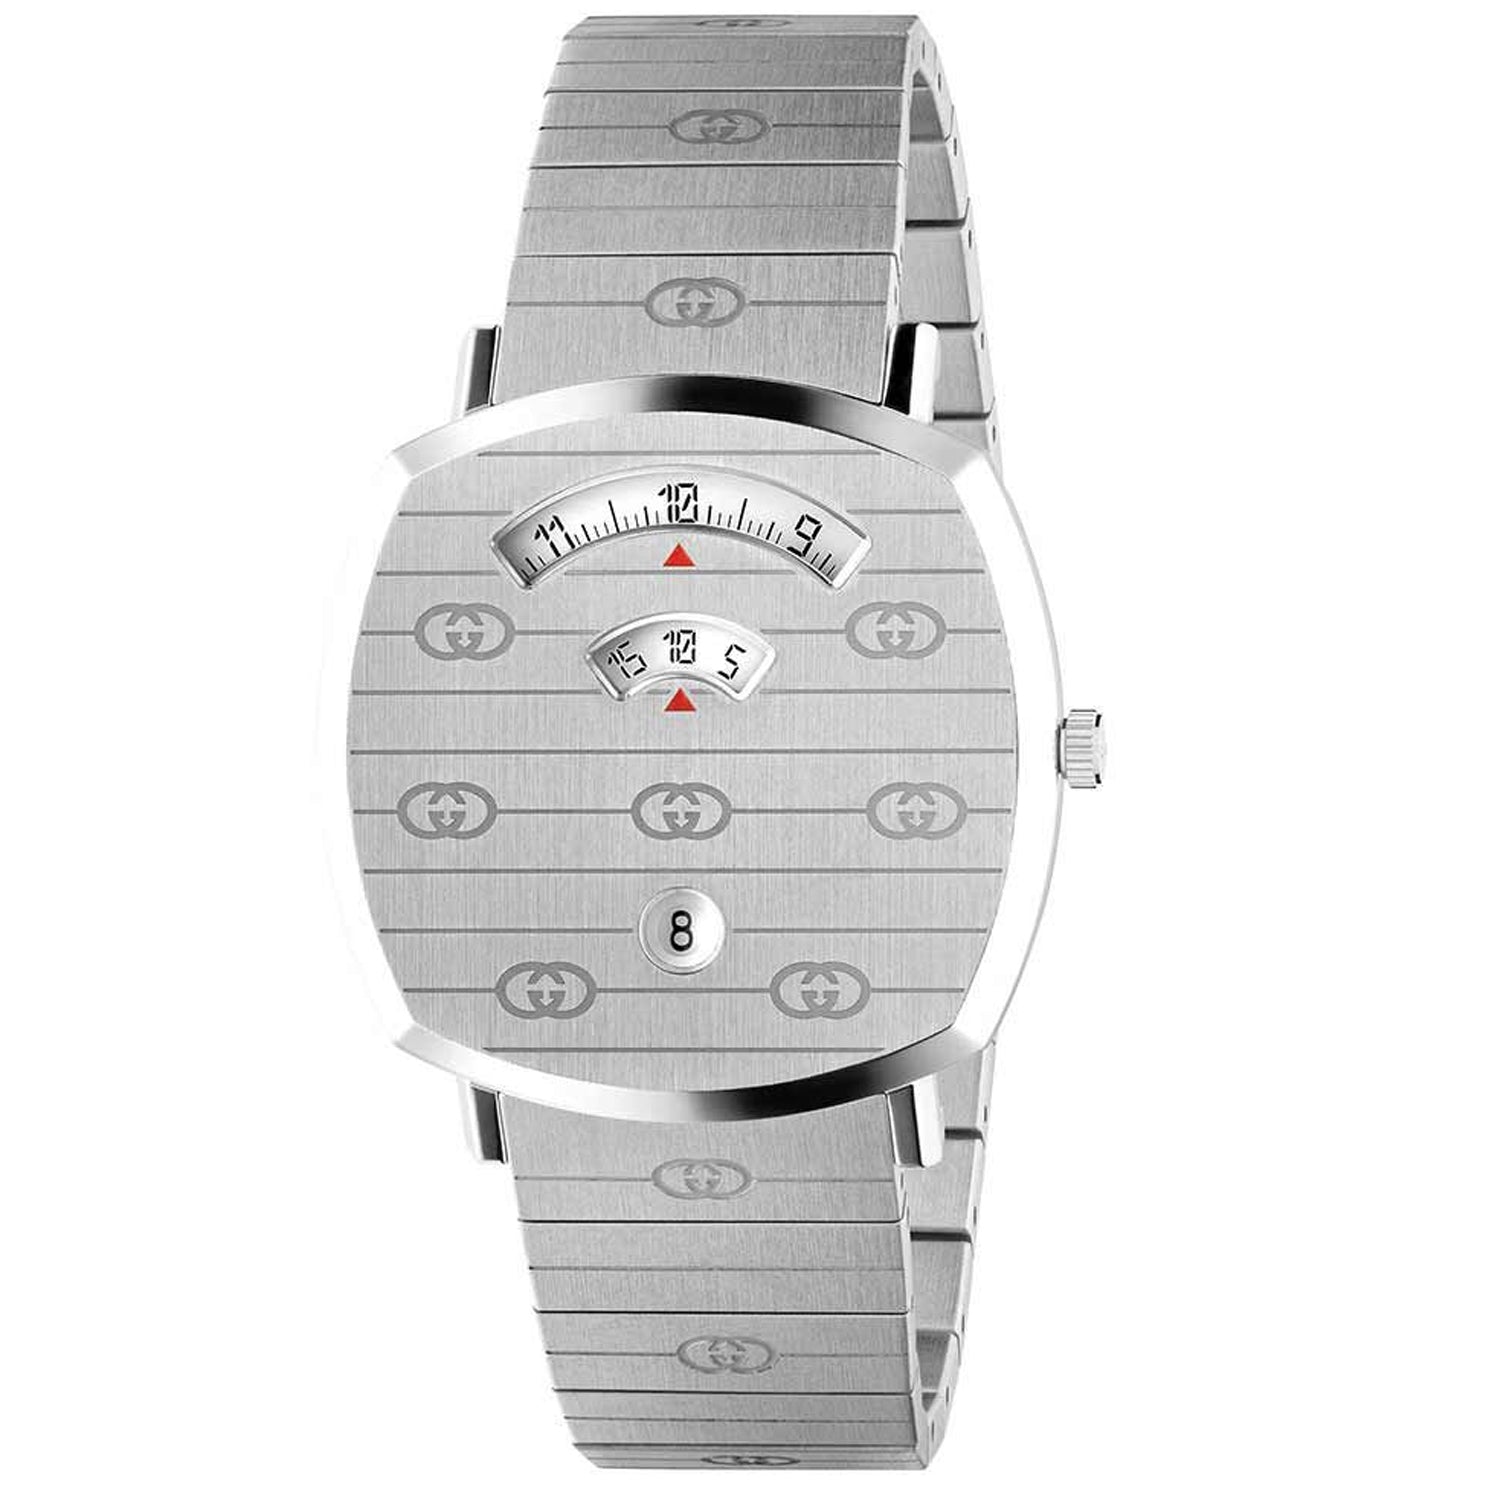 Women's GUCCI Watches Sale, Up To 70% Off | ModeSens